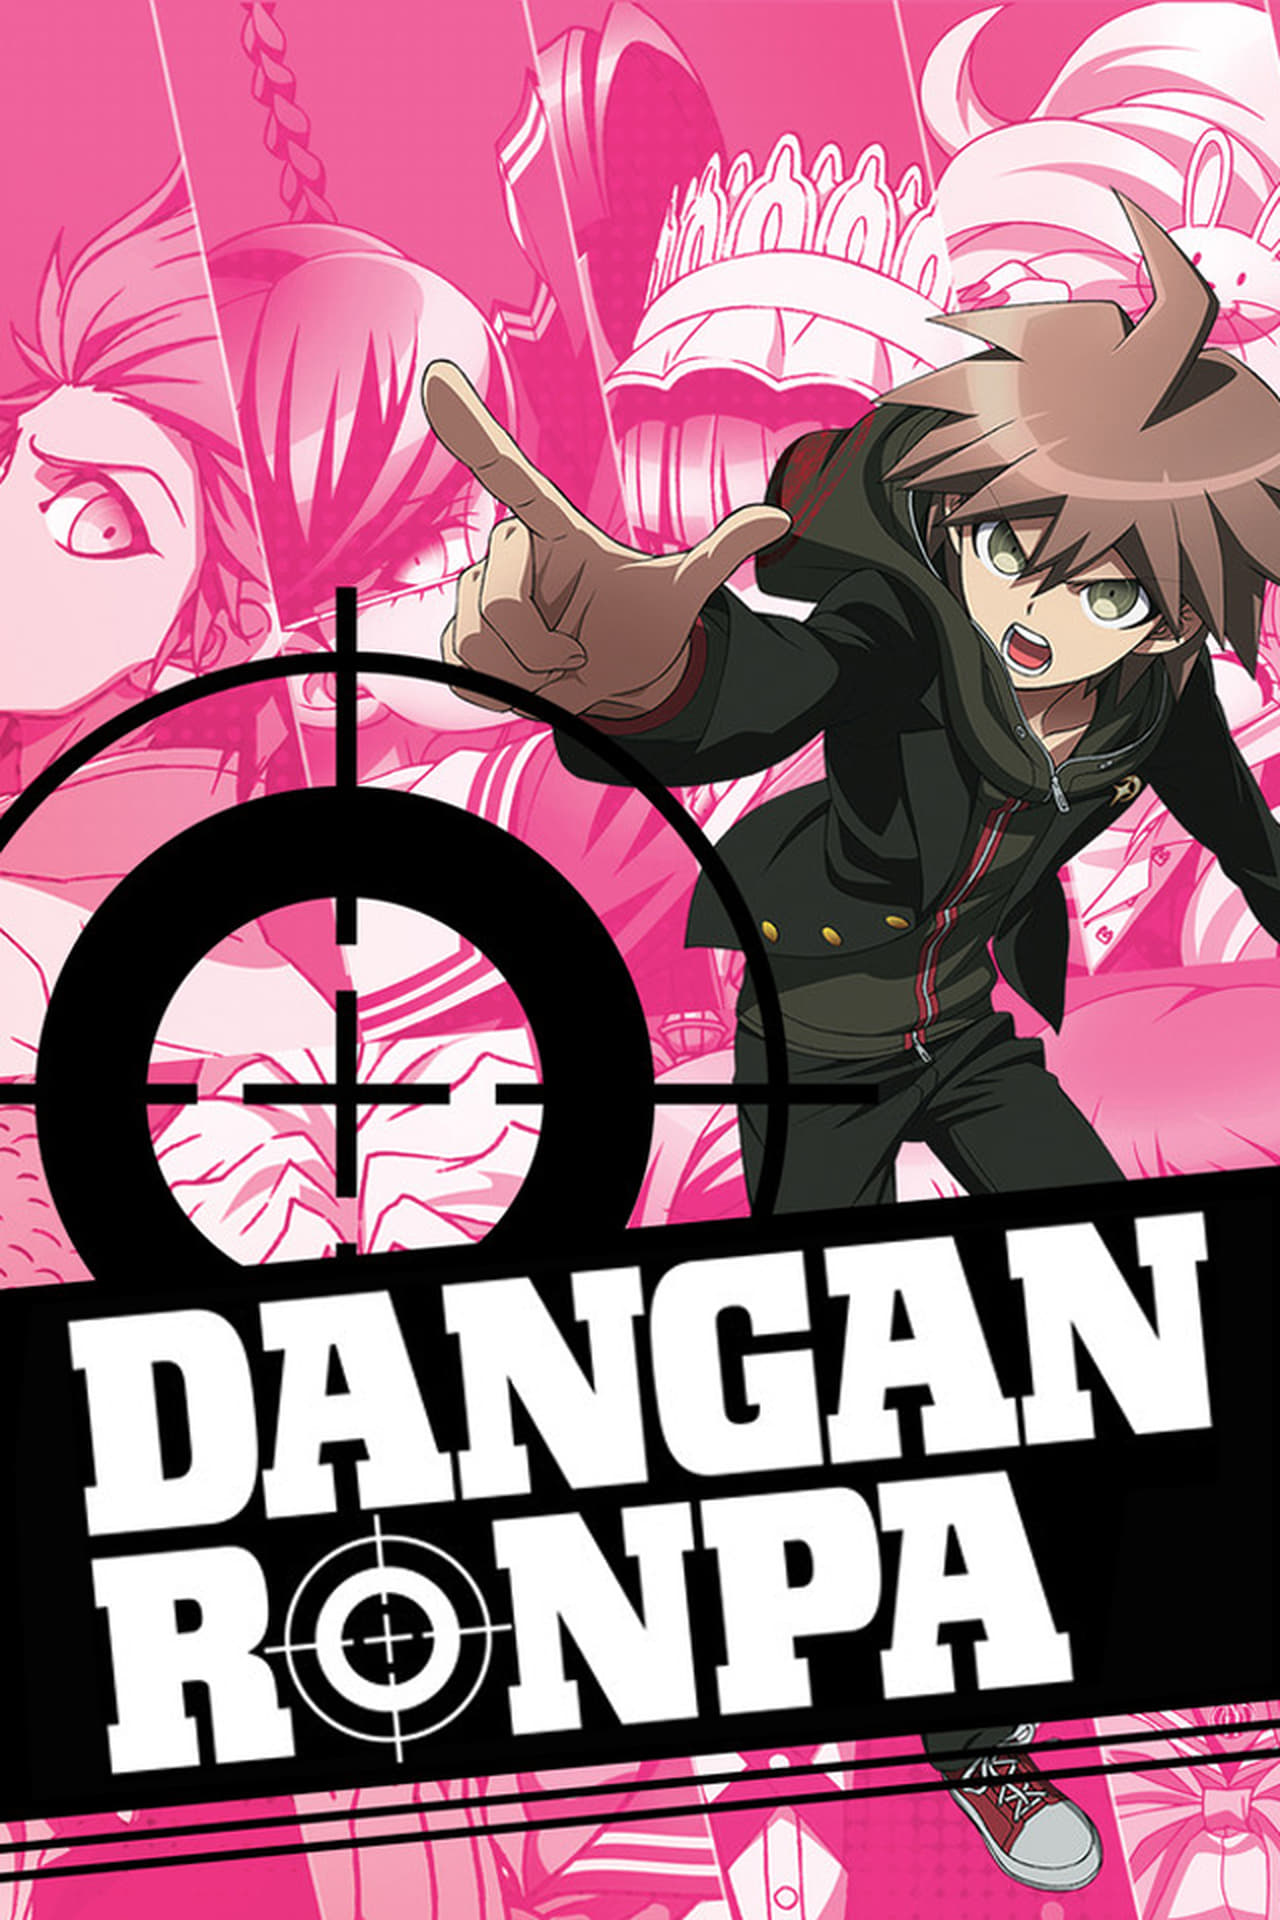 Danganronpa: The Animation release date, trailers, cast, synopsis and